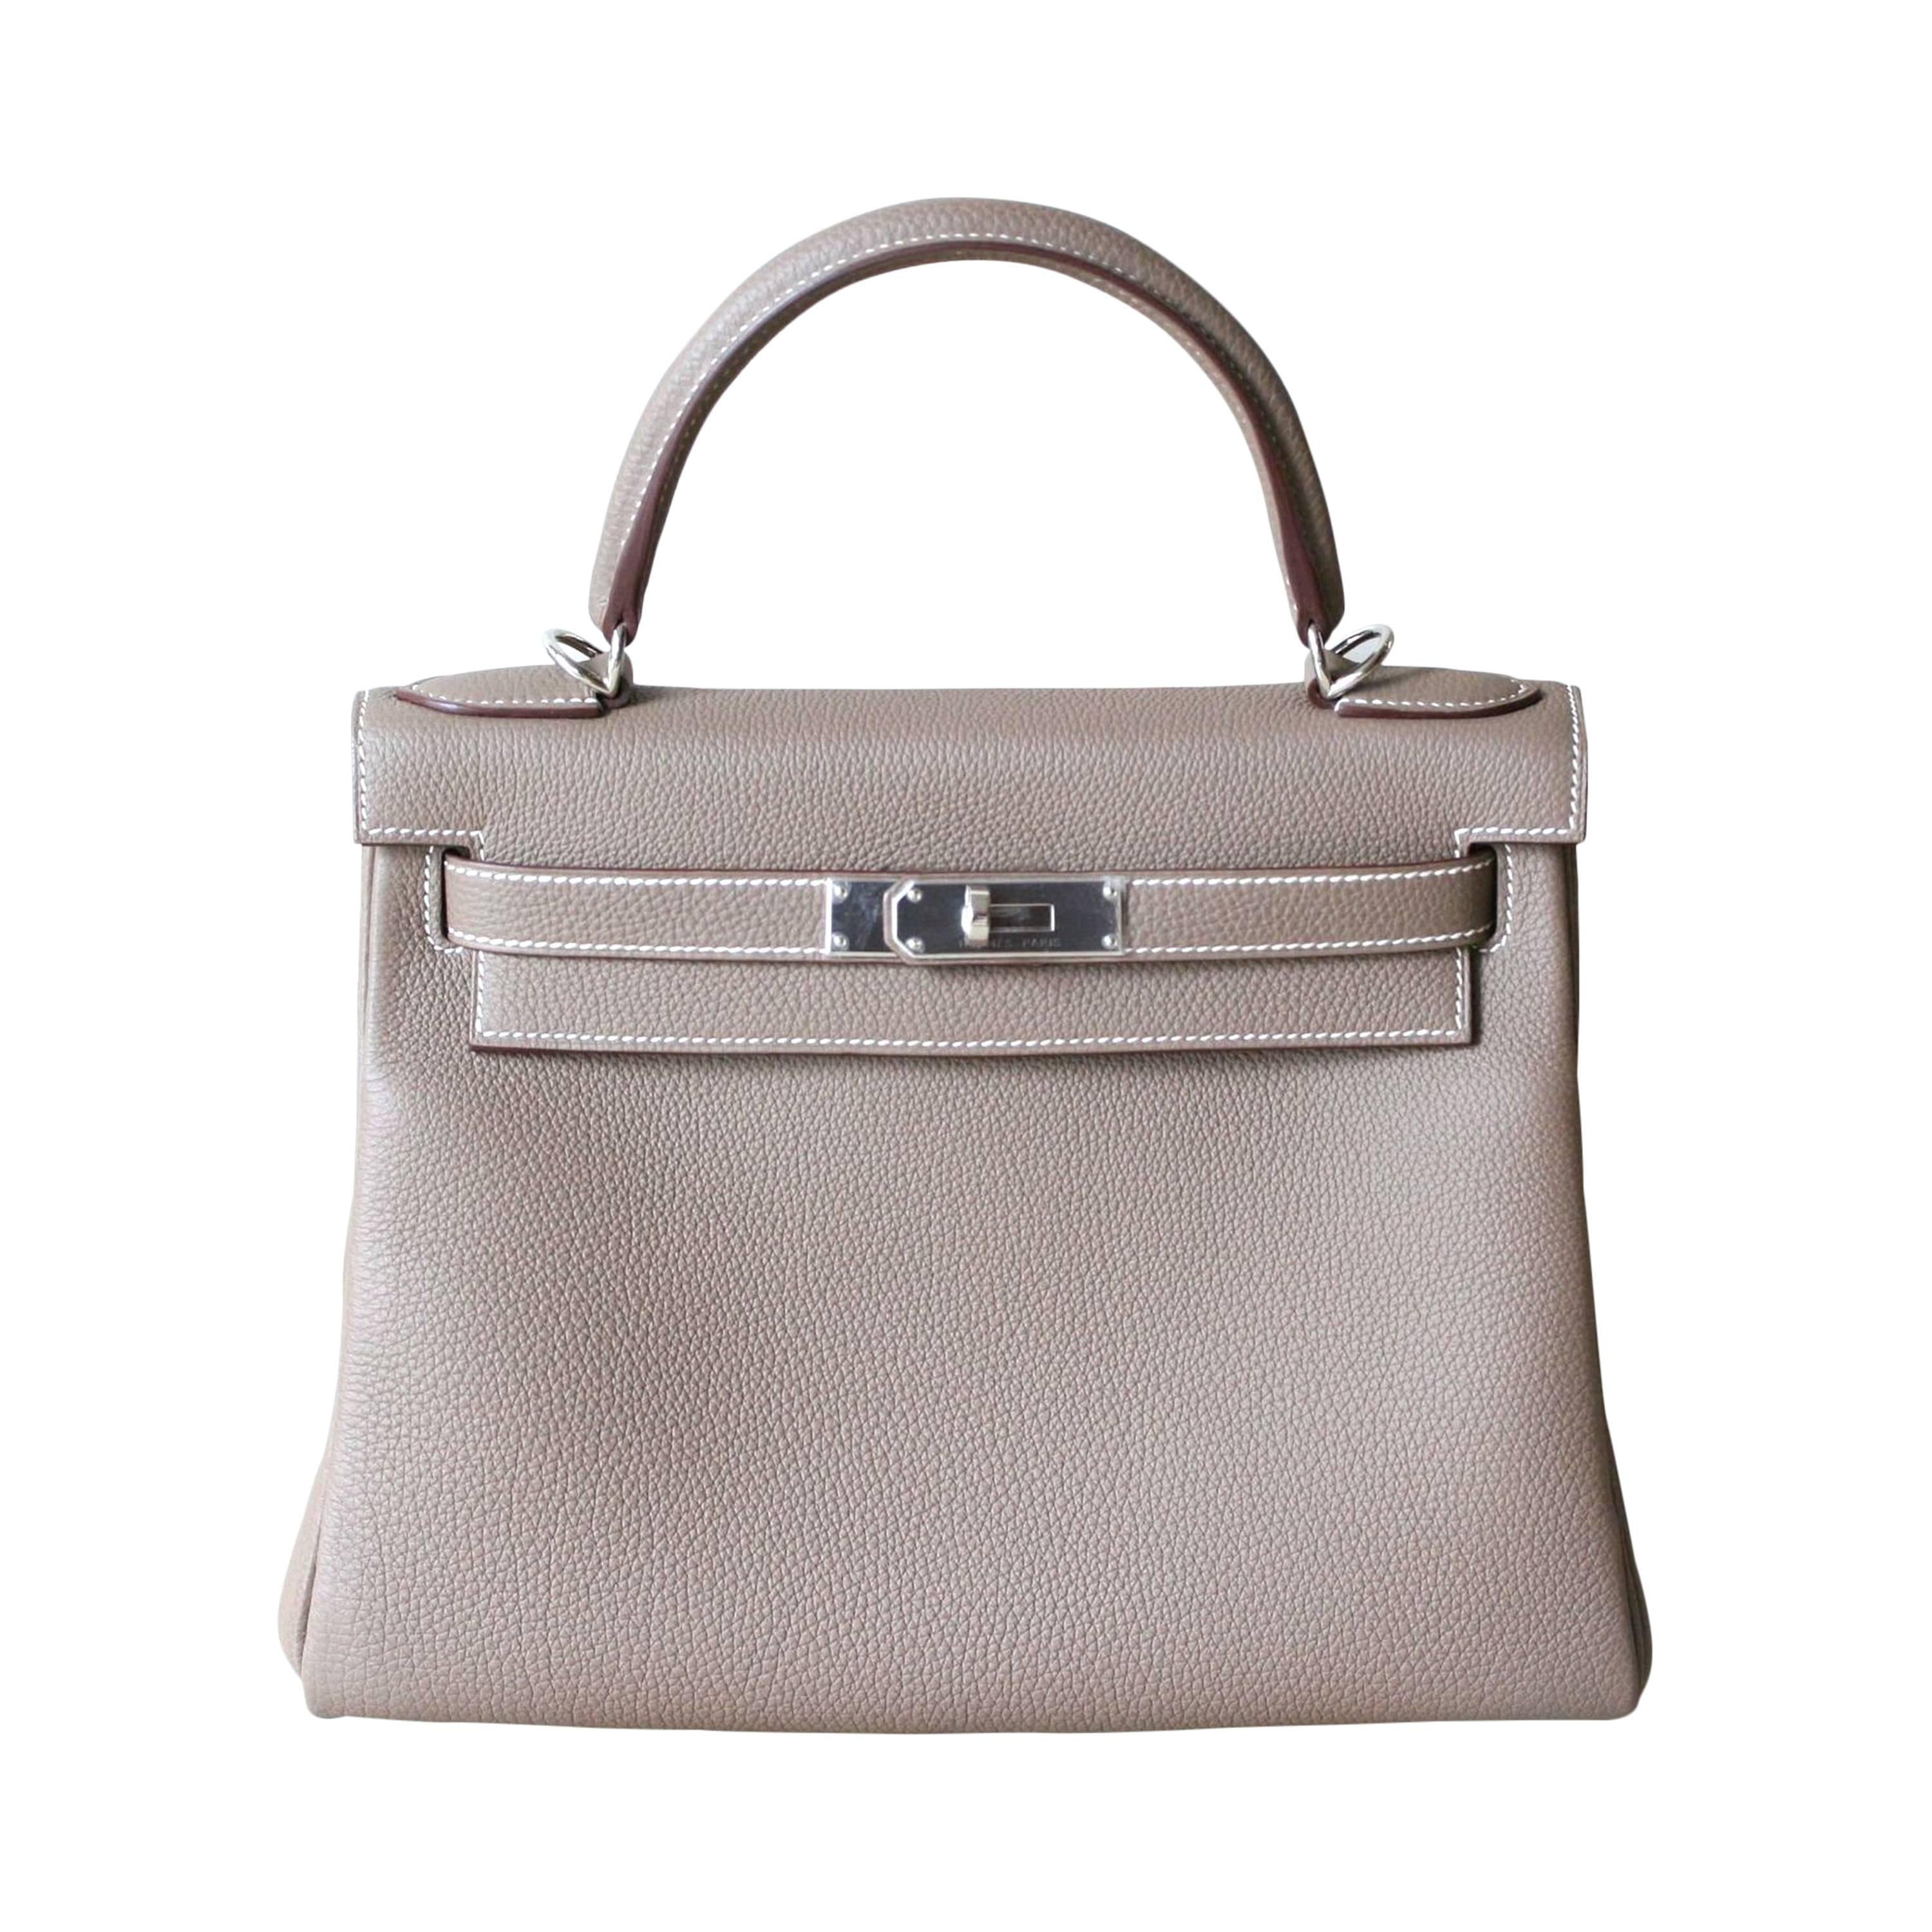 HERMES Kelly étoupe togo leather 28cm  For Sale